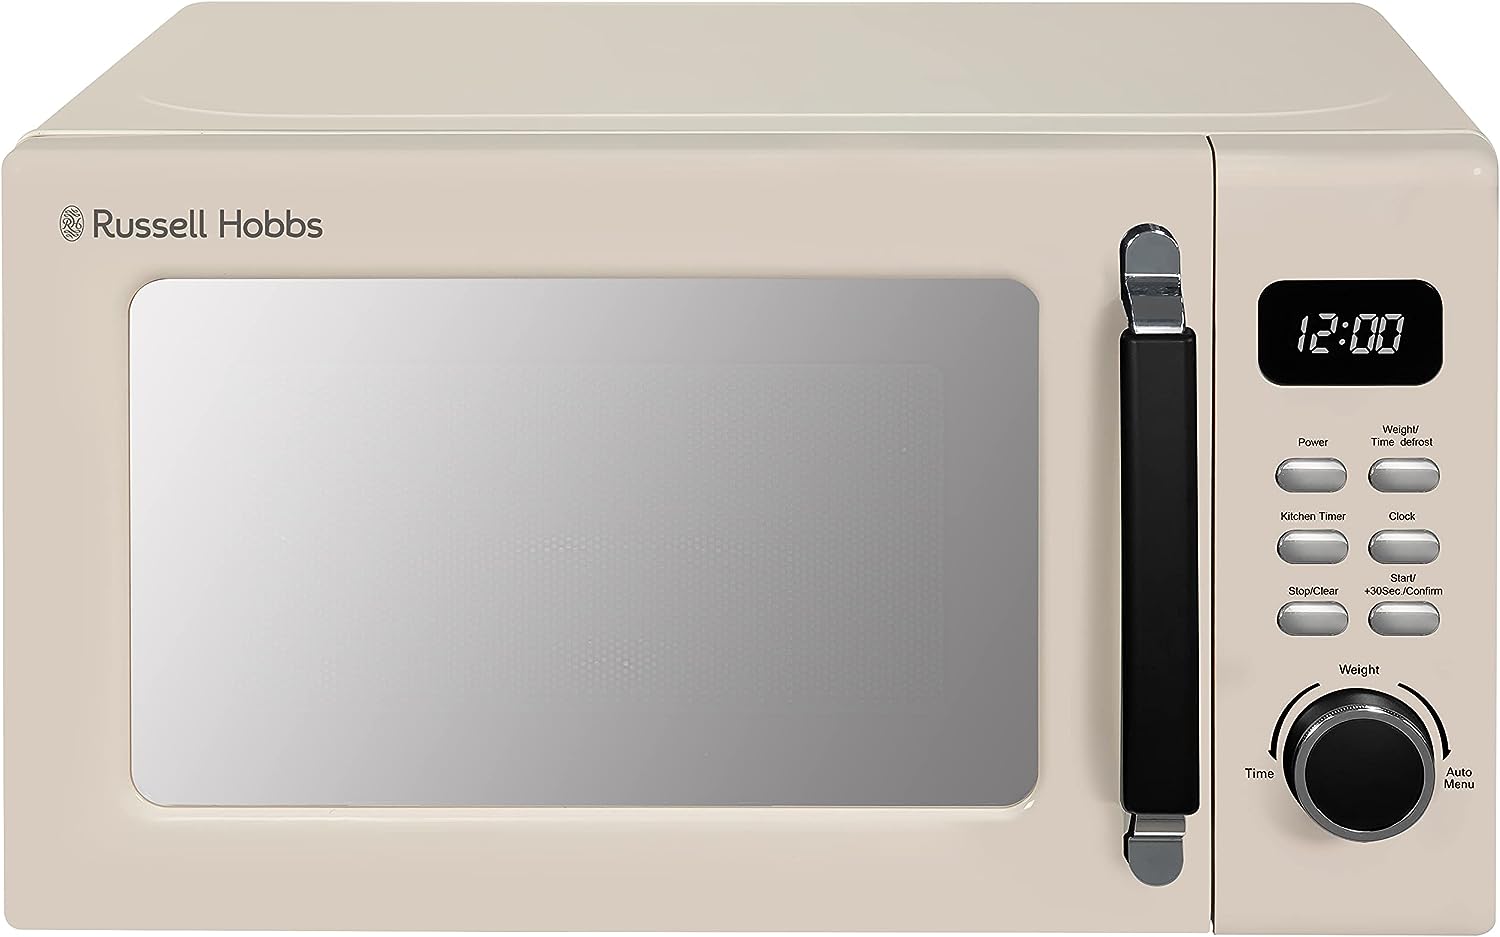 Russell Hobbs RHM2026C STYLEVIA Digital Microwave 20 Litre 800W Cream 5 Power Levels Mirror 8 Automatic Cooking Settings